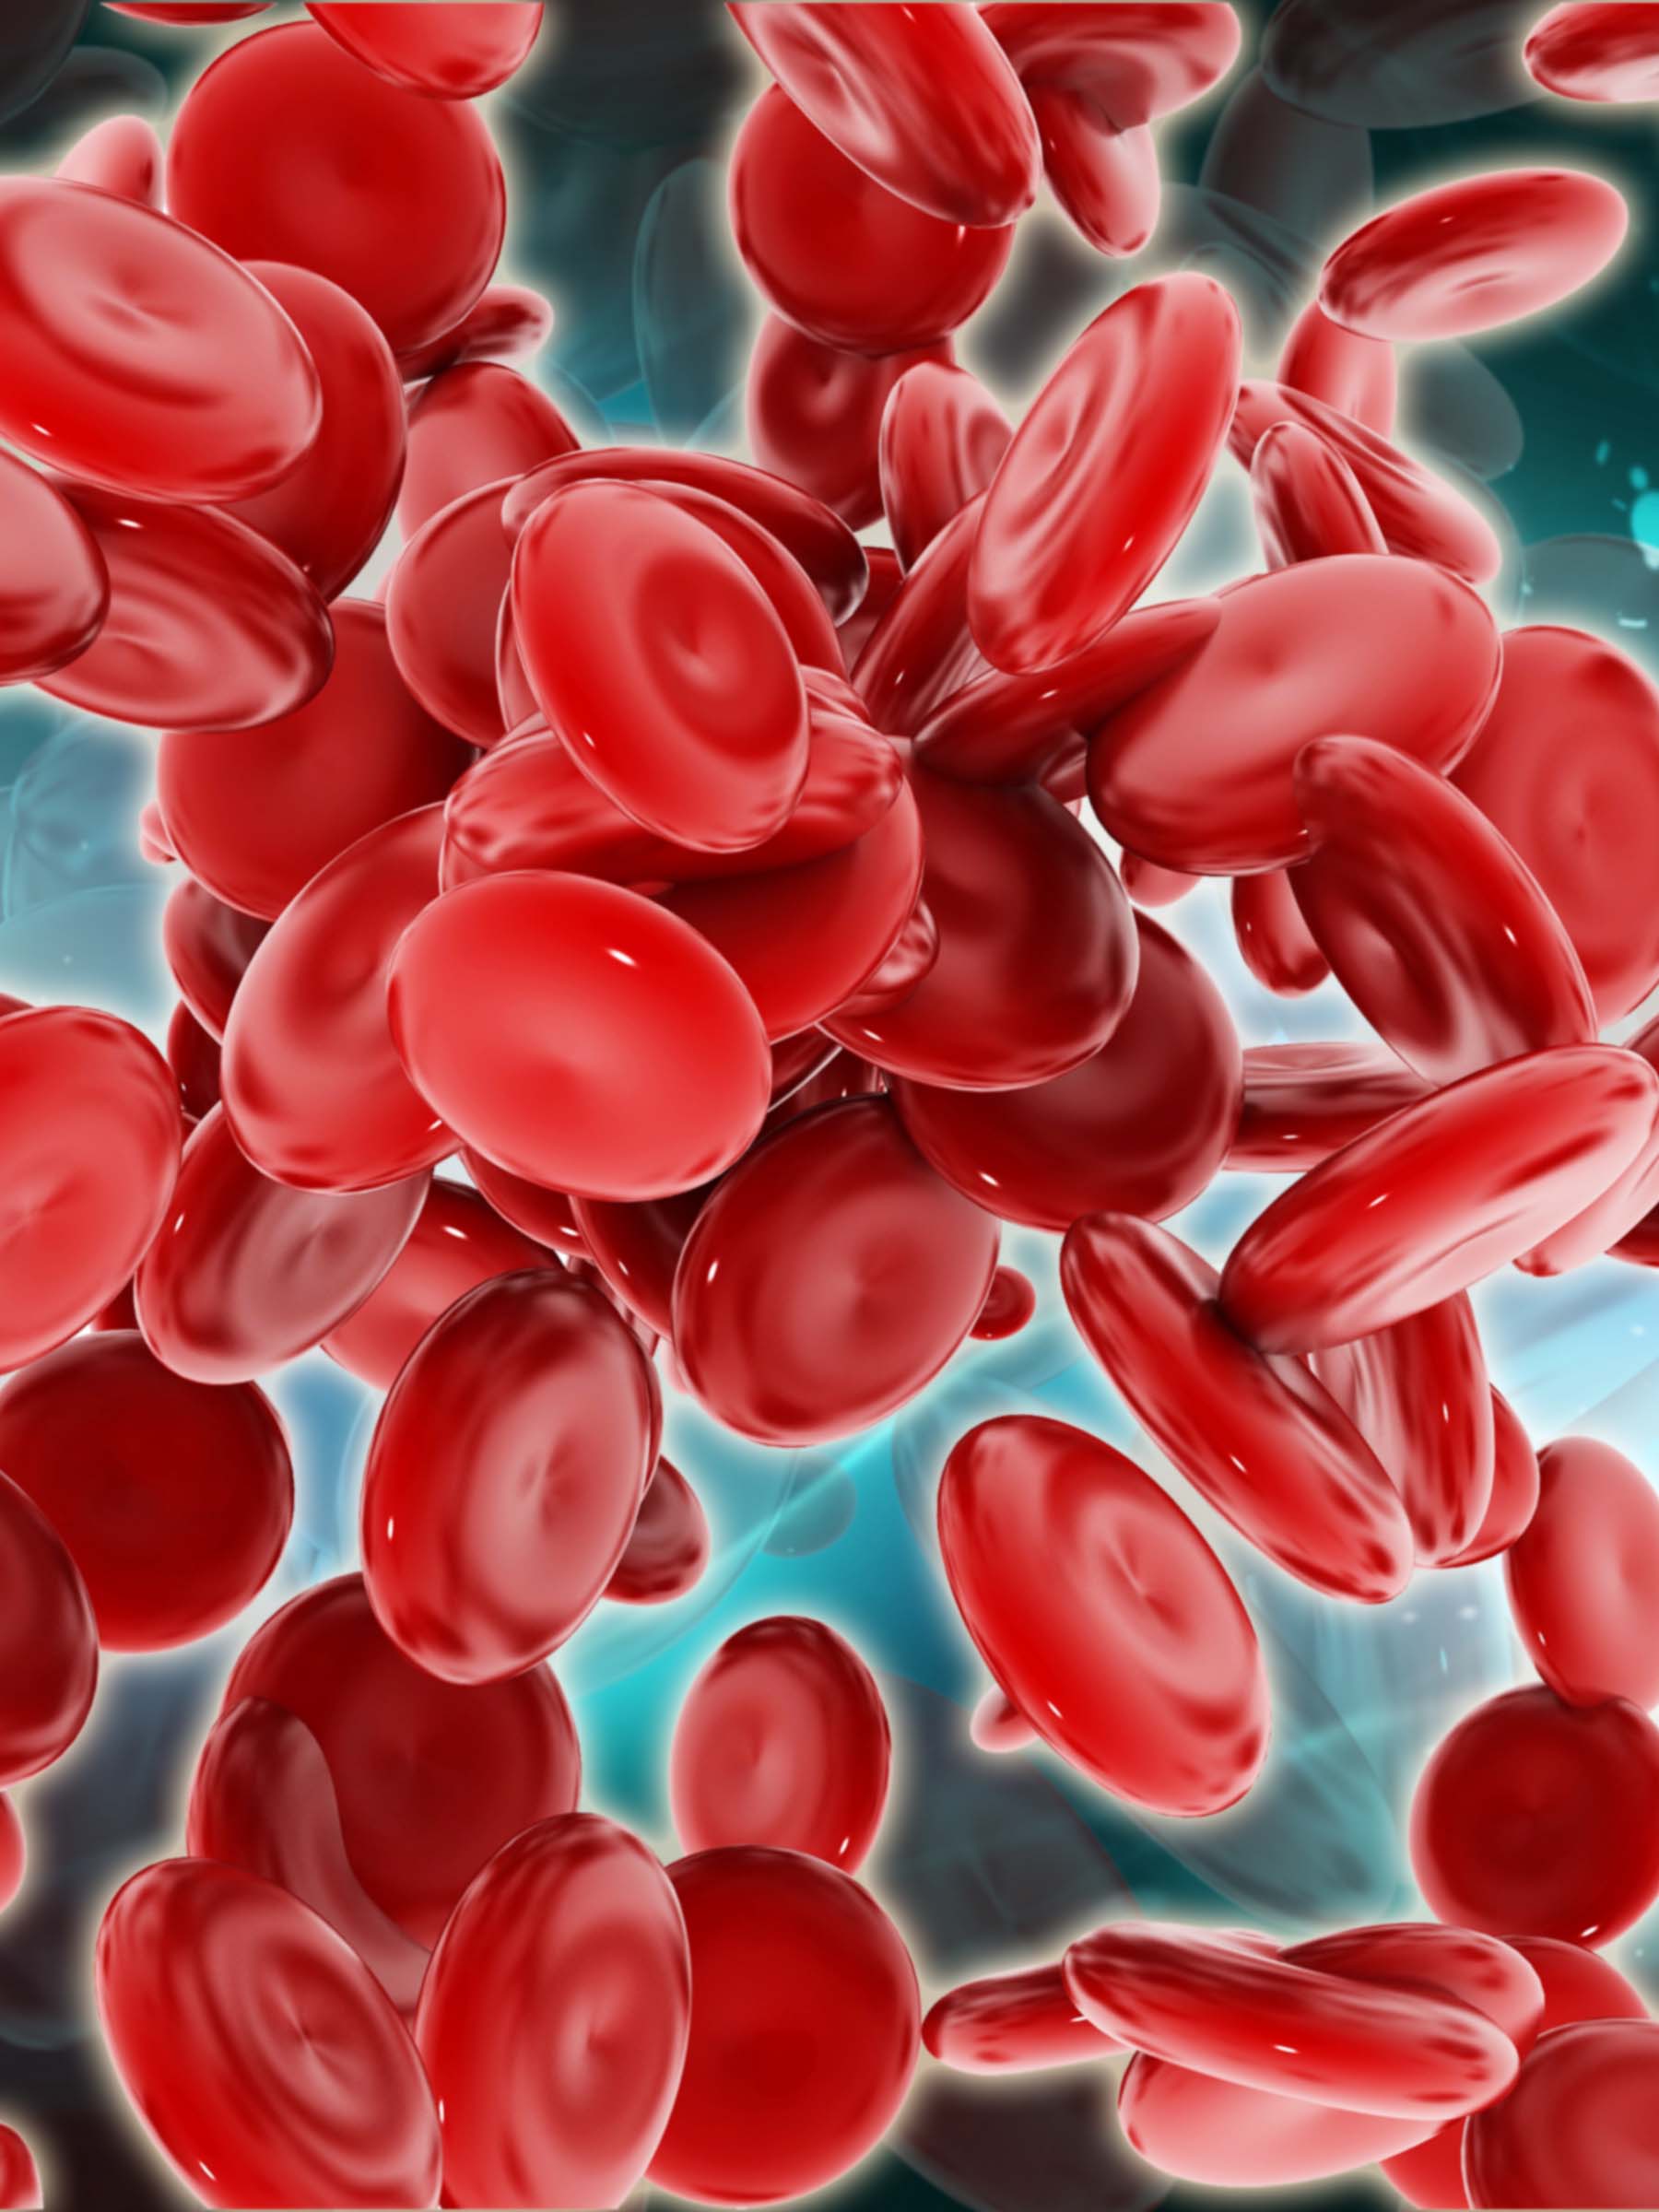 Digital illustration close up of red blood cells in blood stream